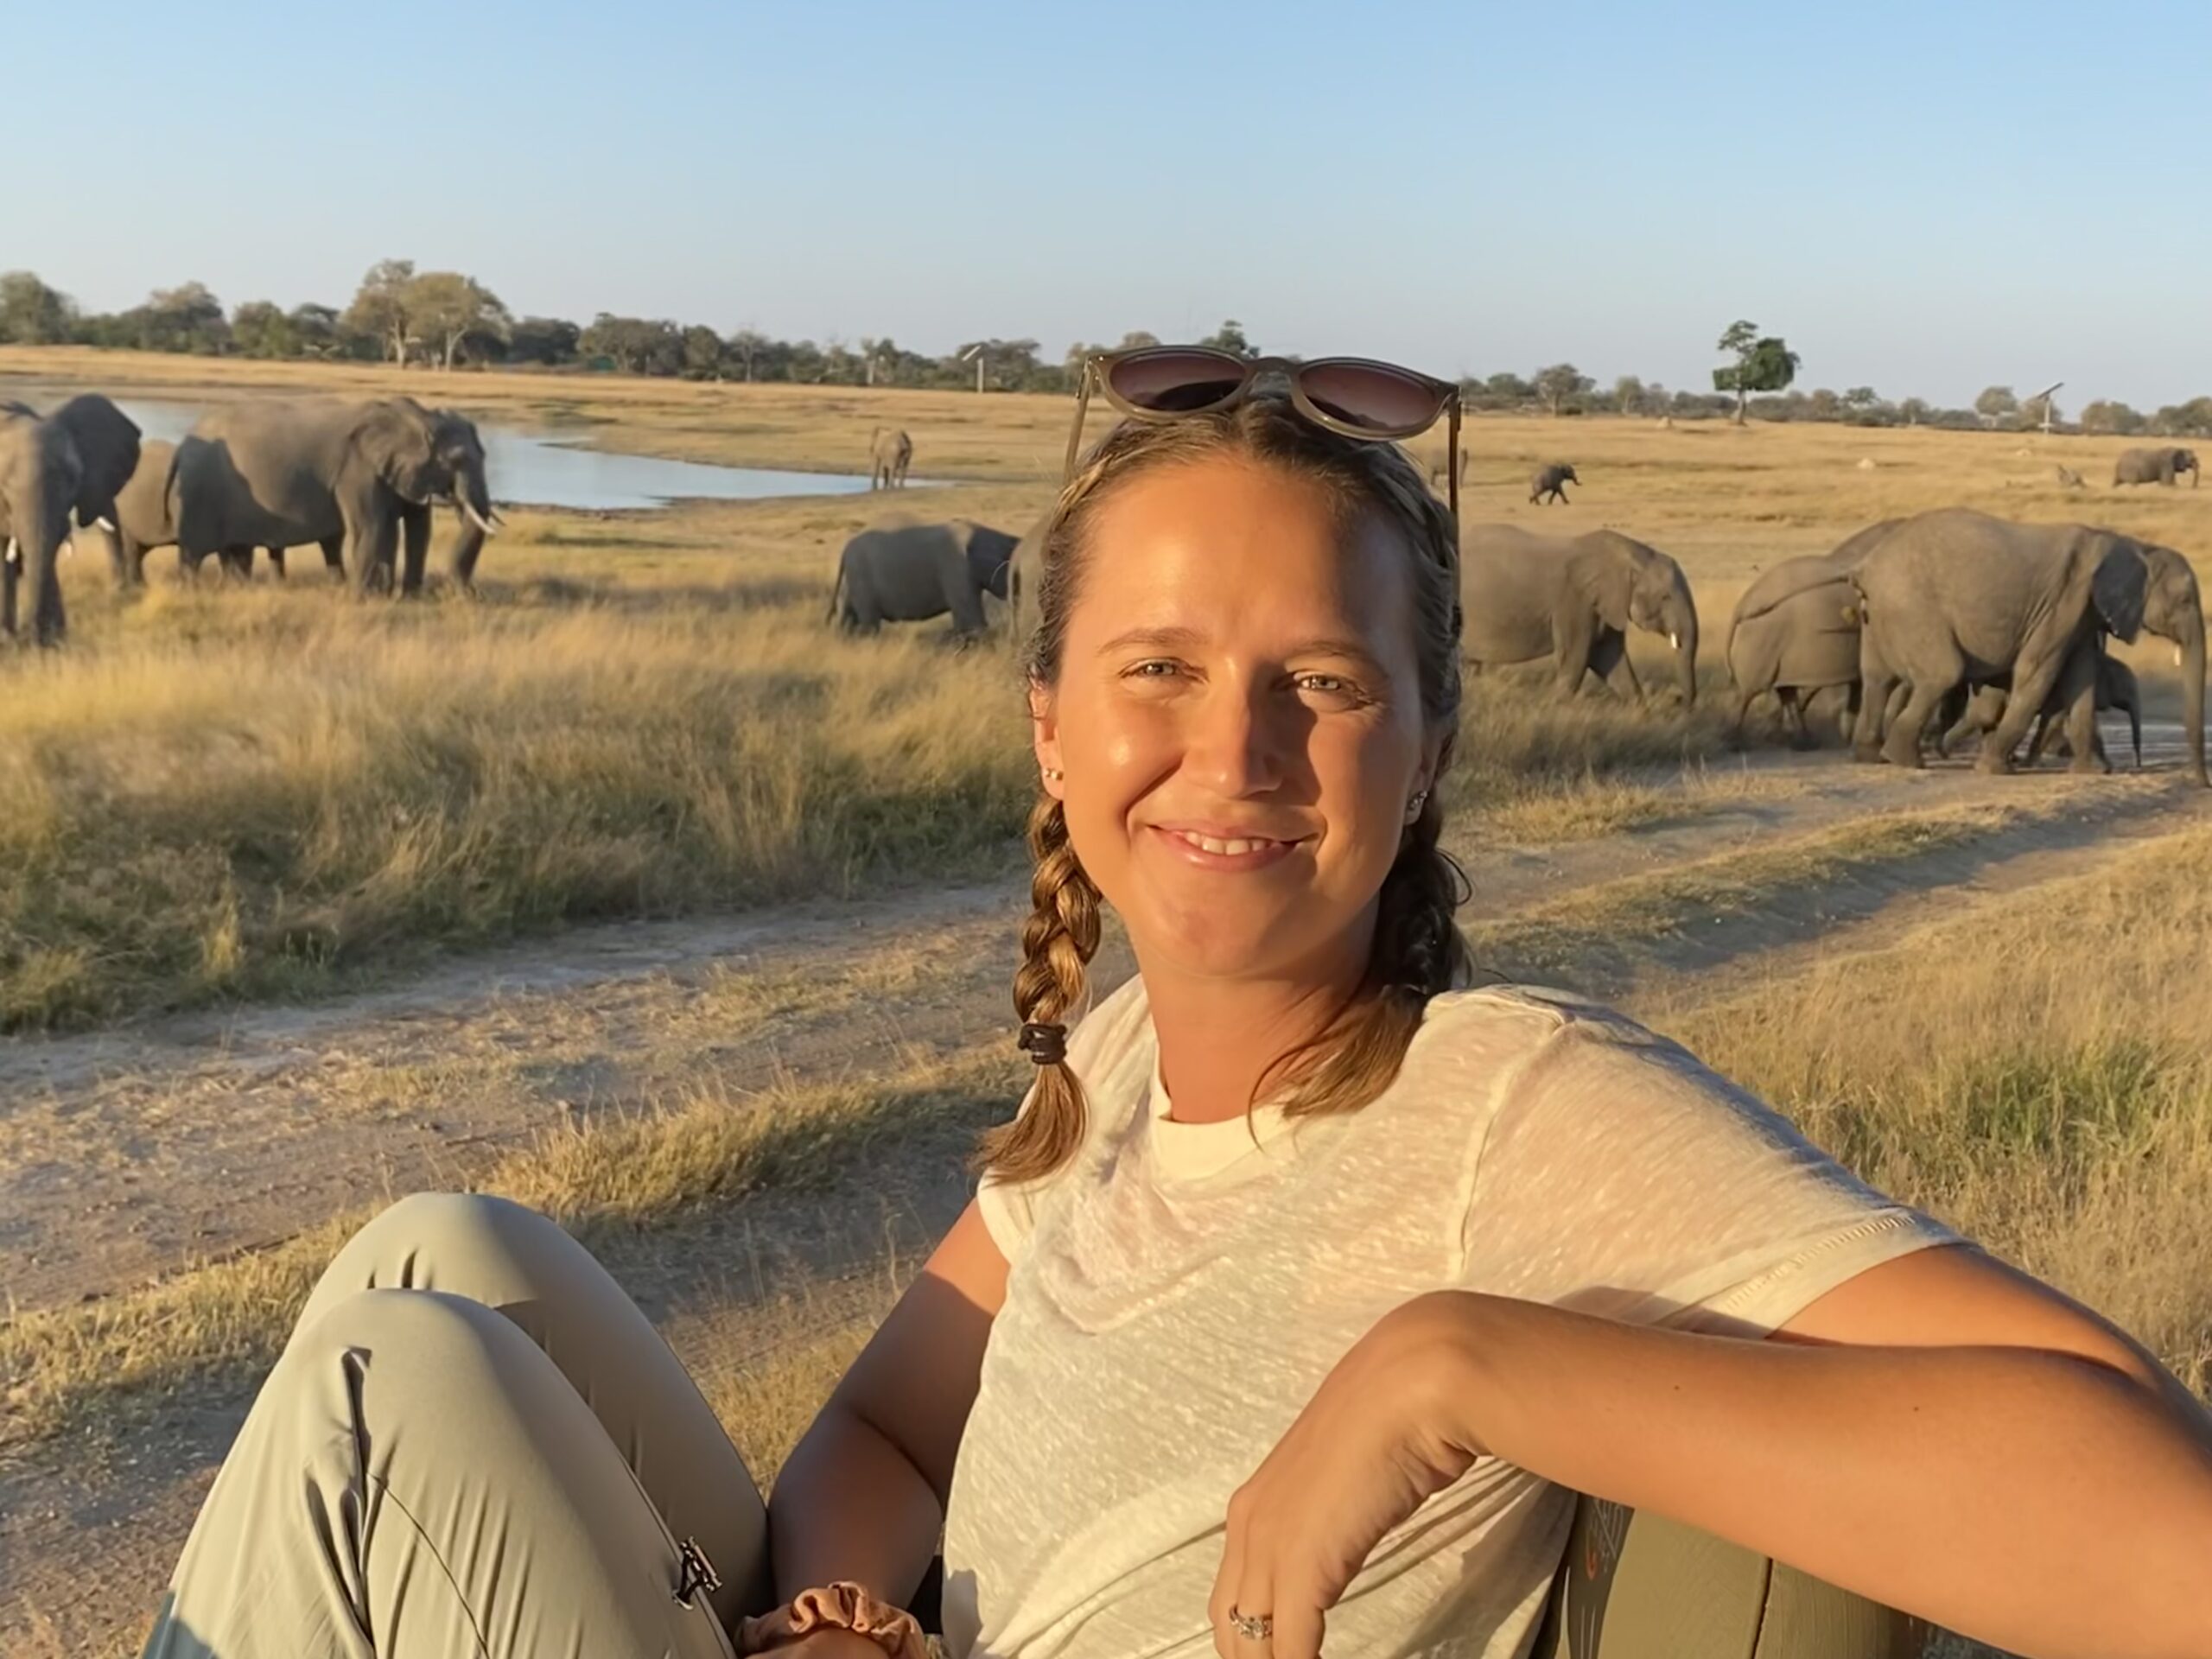 a woman sitting in a chair in front of a herd of elephants.